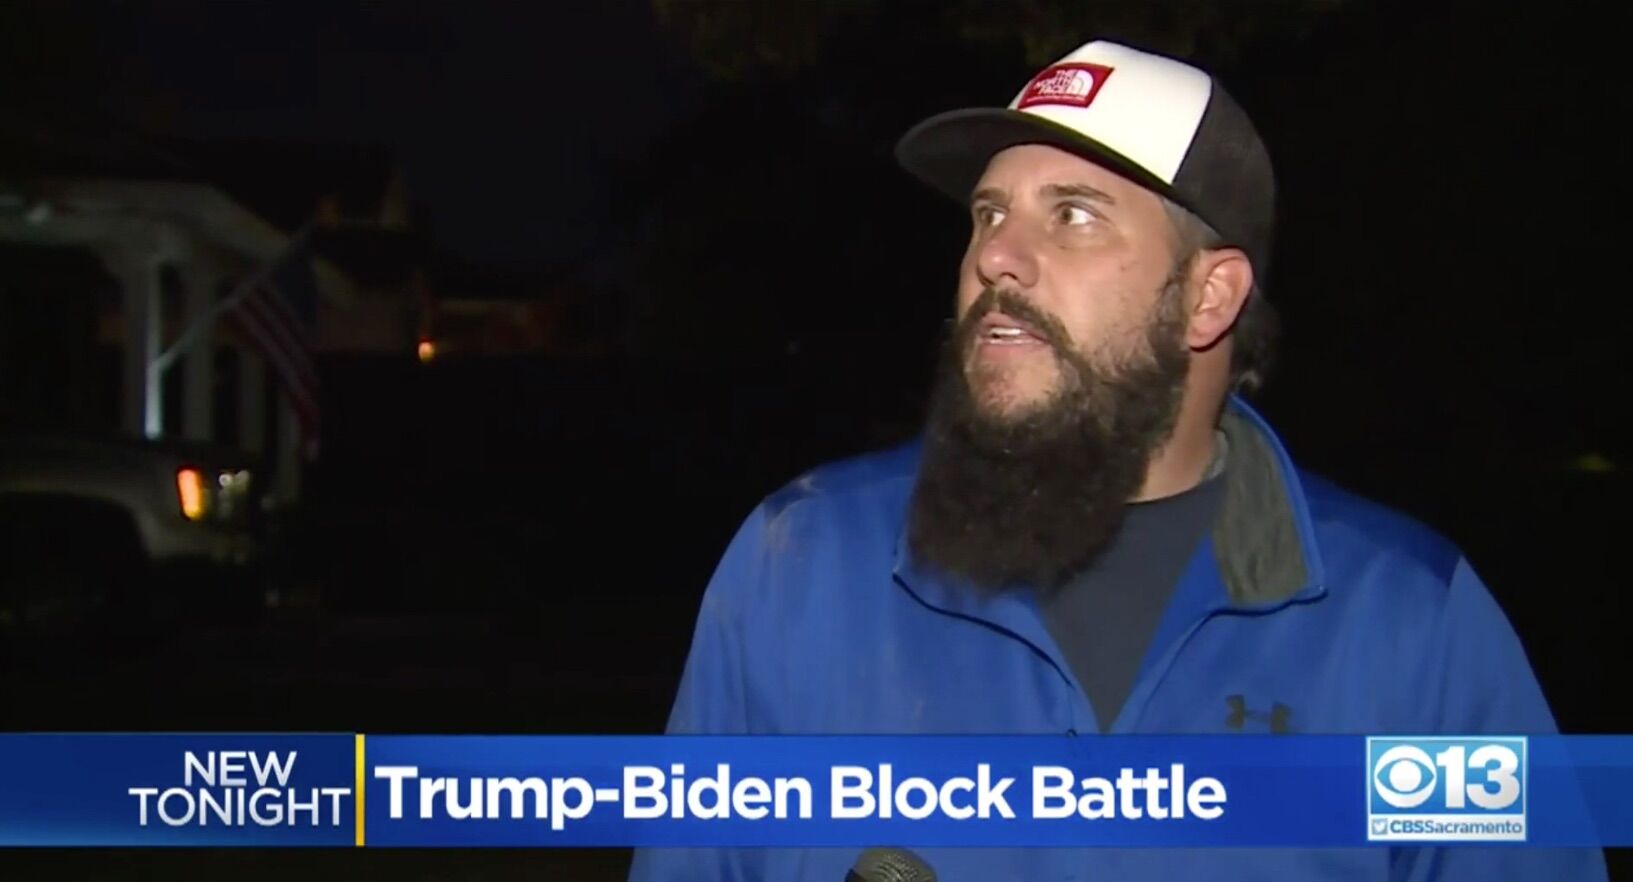 Michael Mason, a Trump supporter, filed a restraining order against his neighbors who support Joe Biden